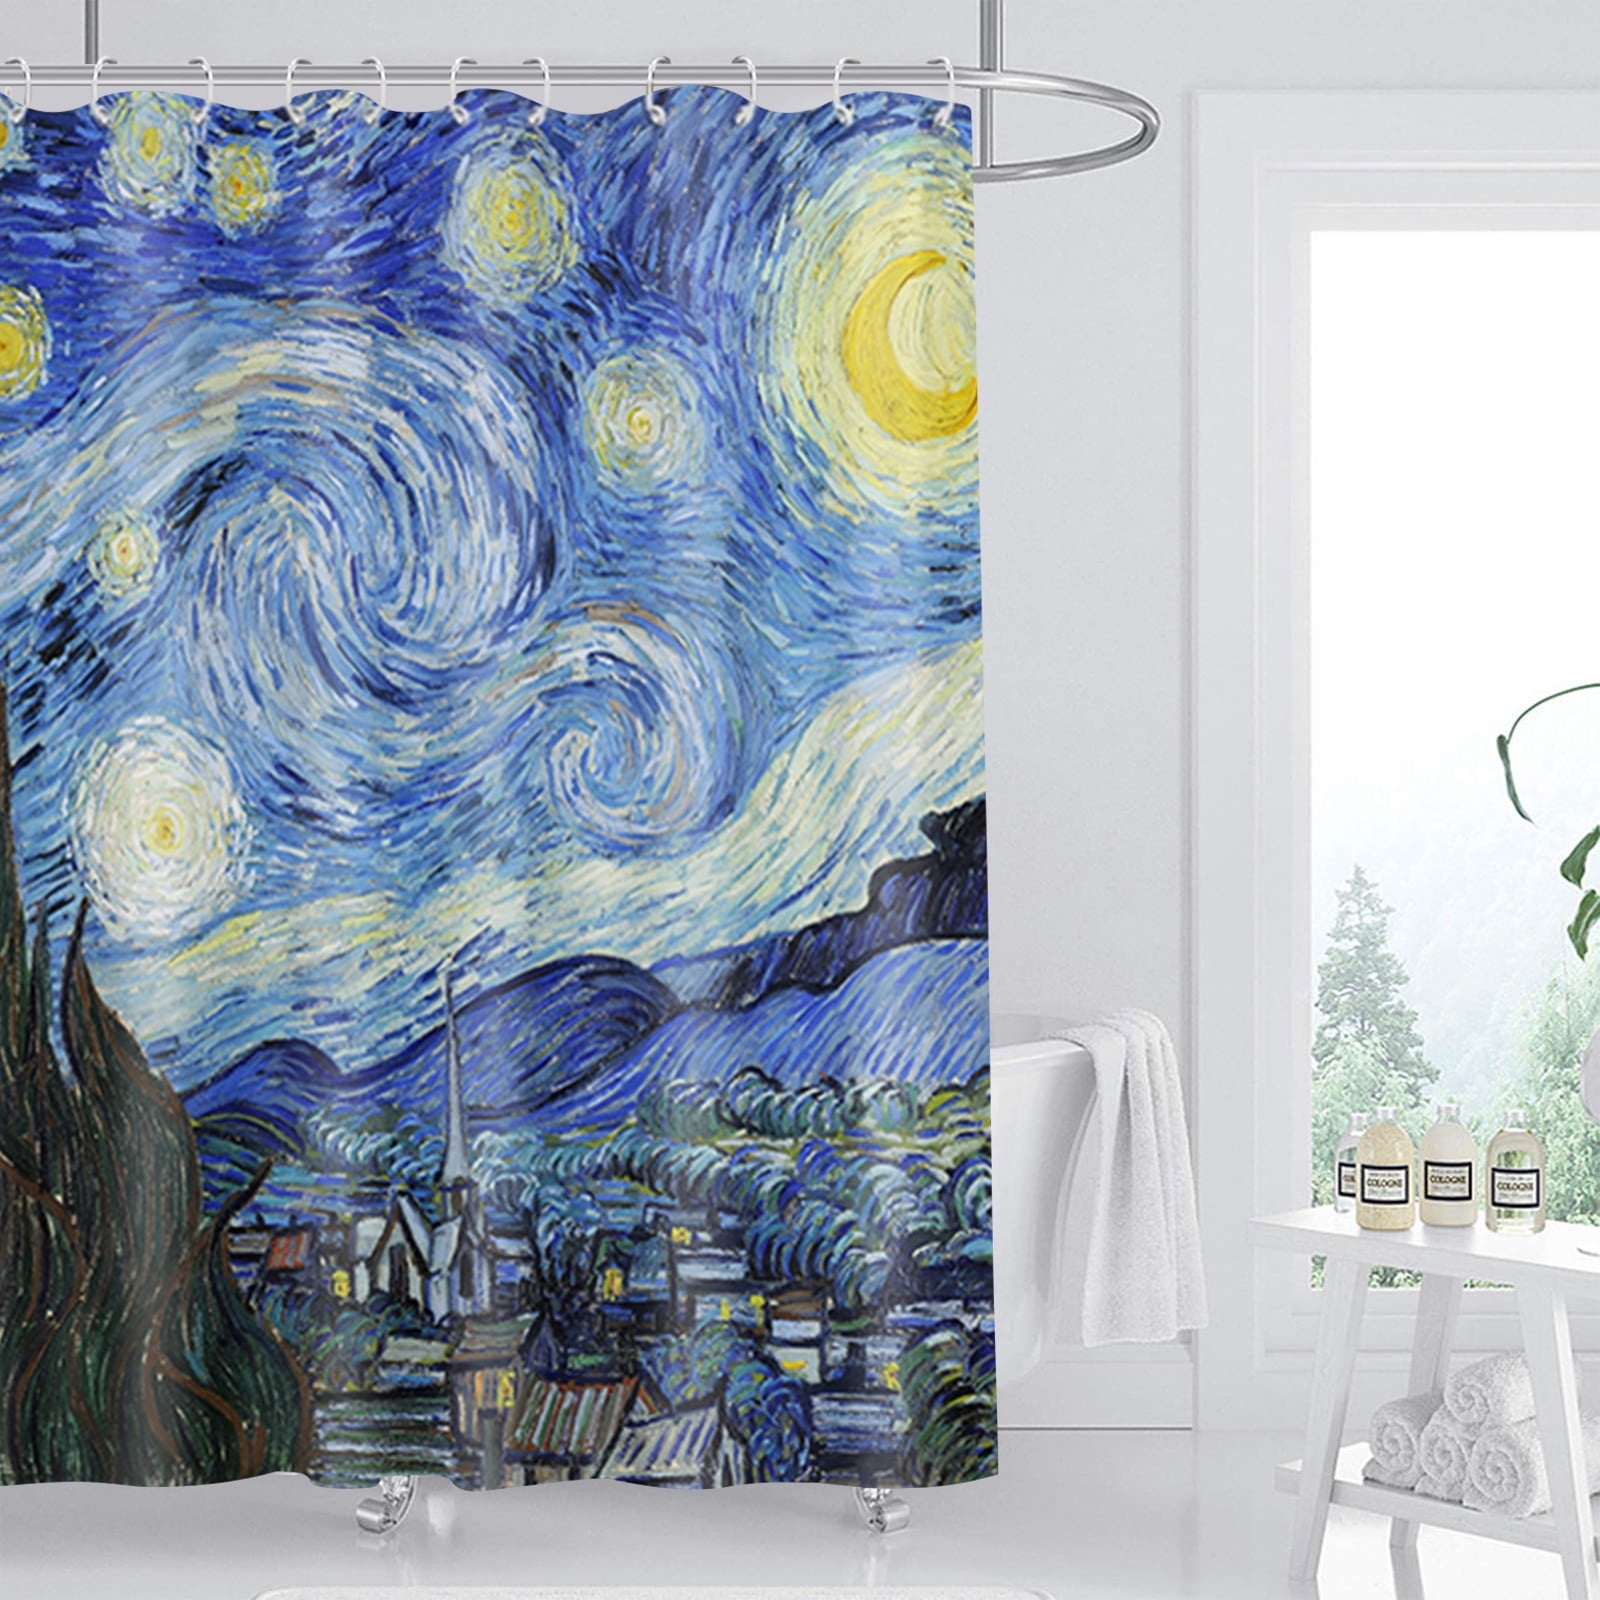 72" Abstract Art Oil Painting Print Waterproof Fabric Bath Shower Curtain w/Hook